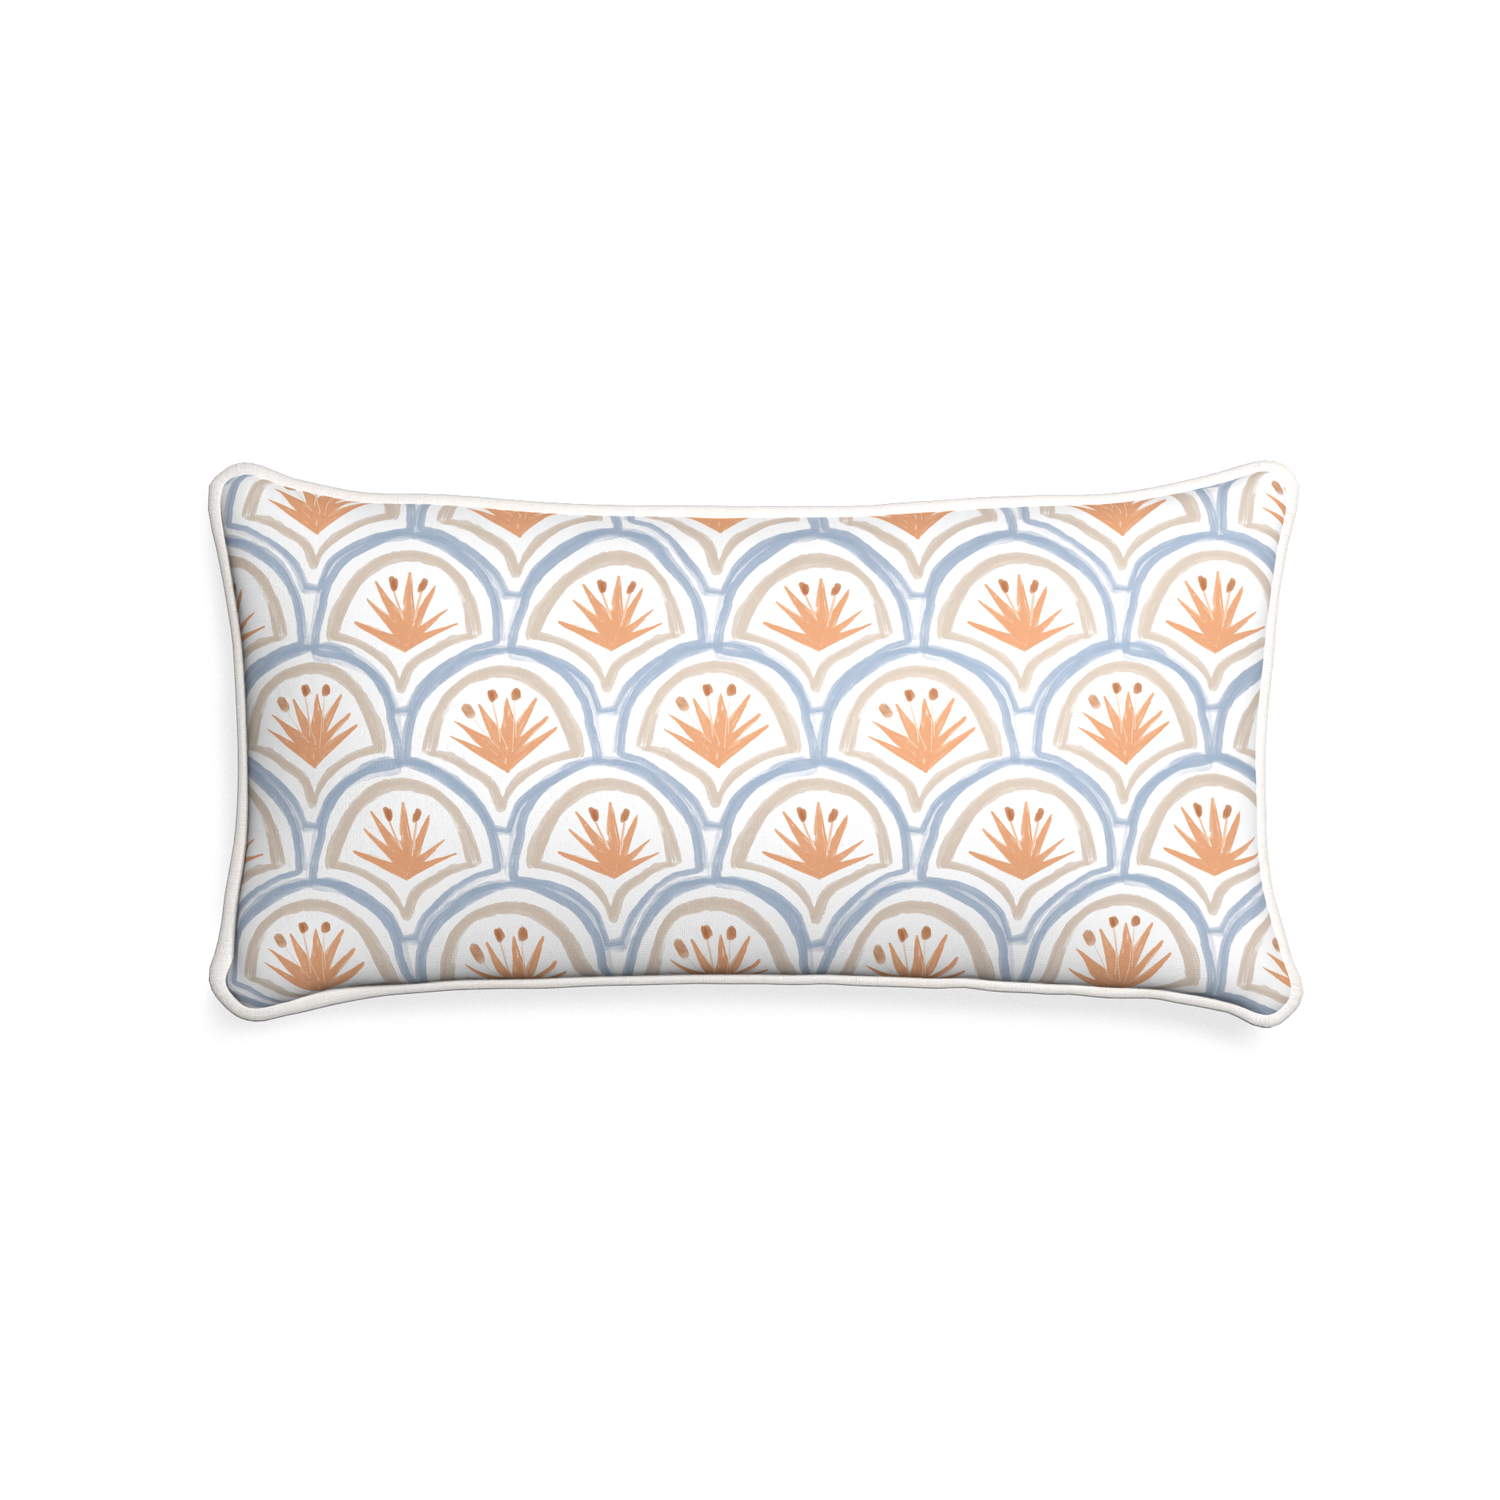 Midi-lumbar thatcher apricot custom art deco palm patternpillow with snow piping on white background